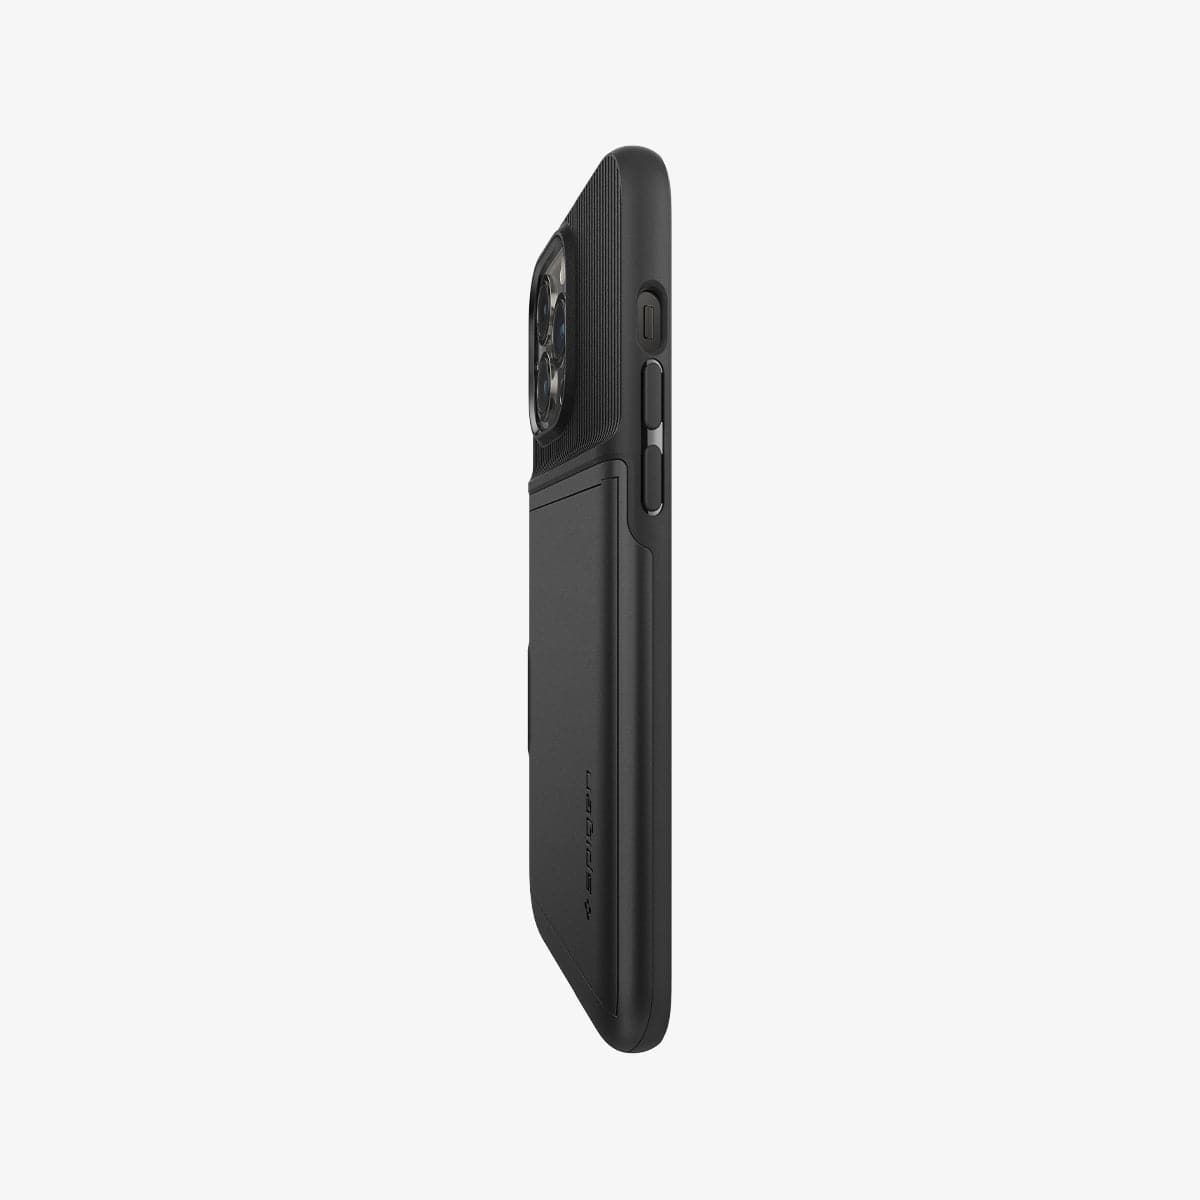 ACS03218 - iPhone 13 Pro Max Case Slim Armor CS in black showing the side and partial back